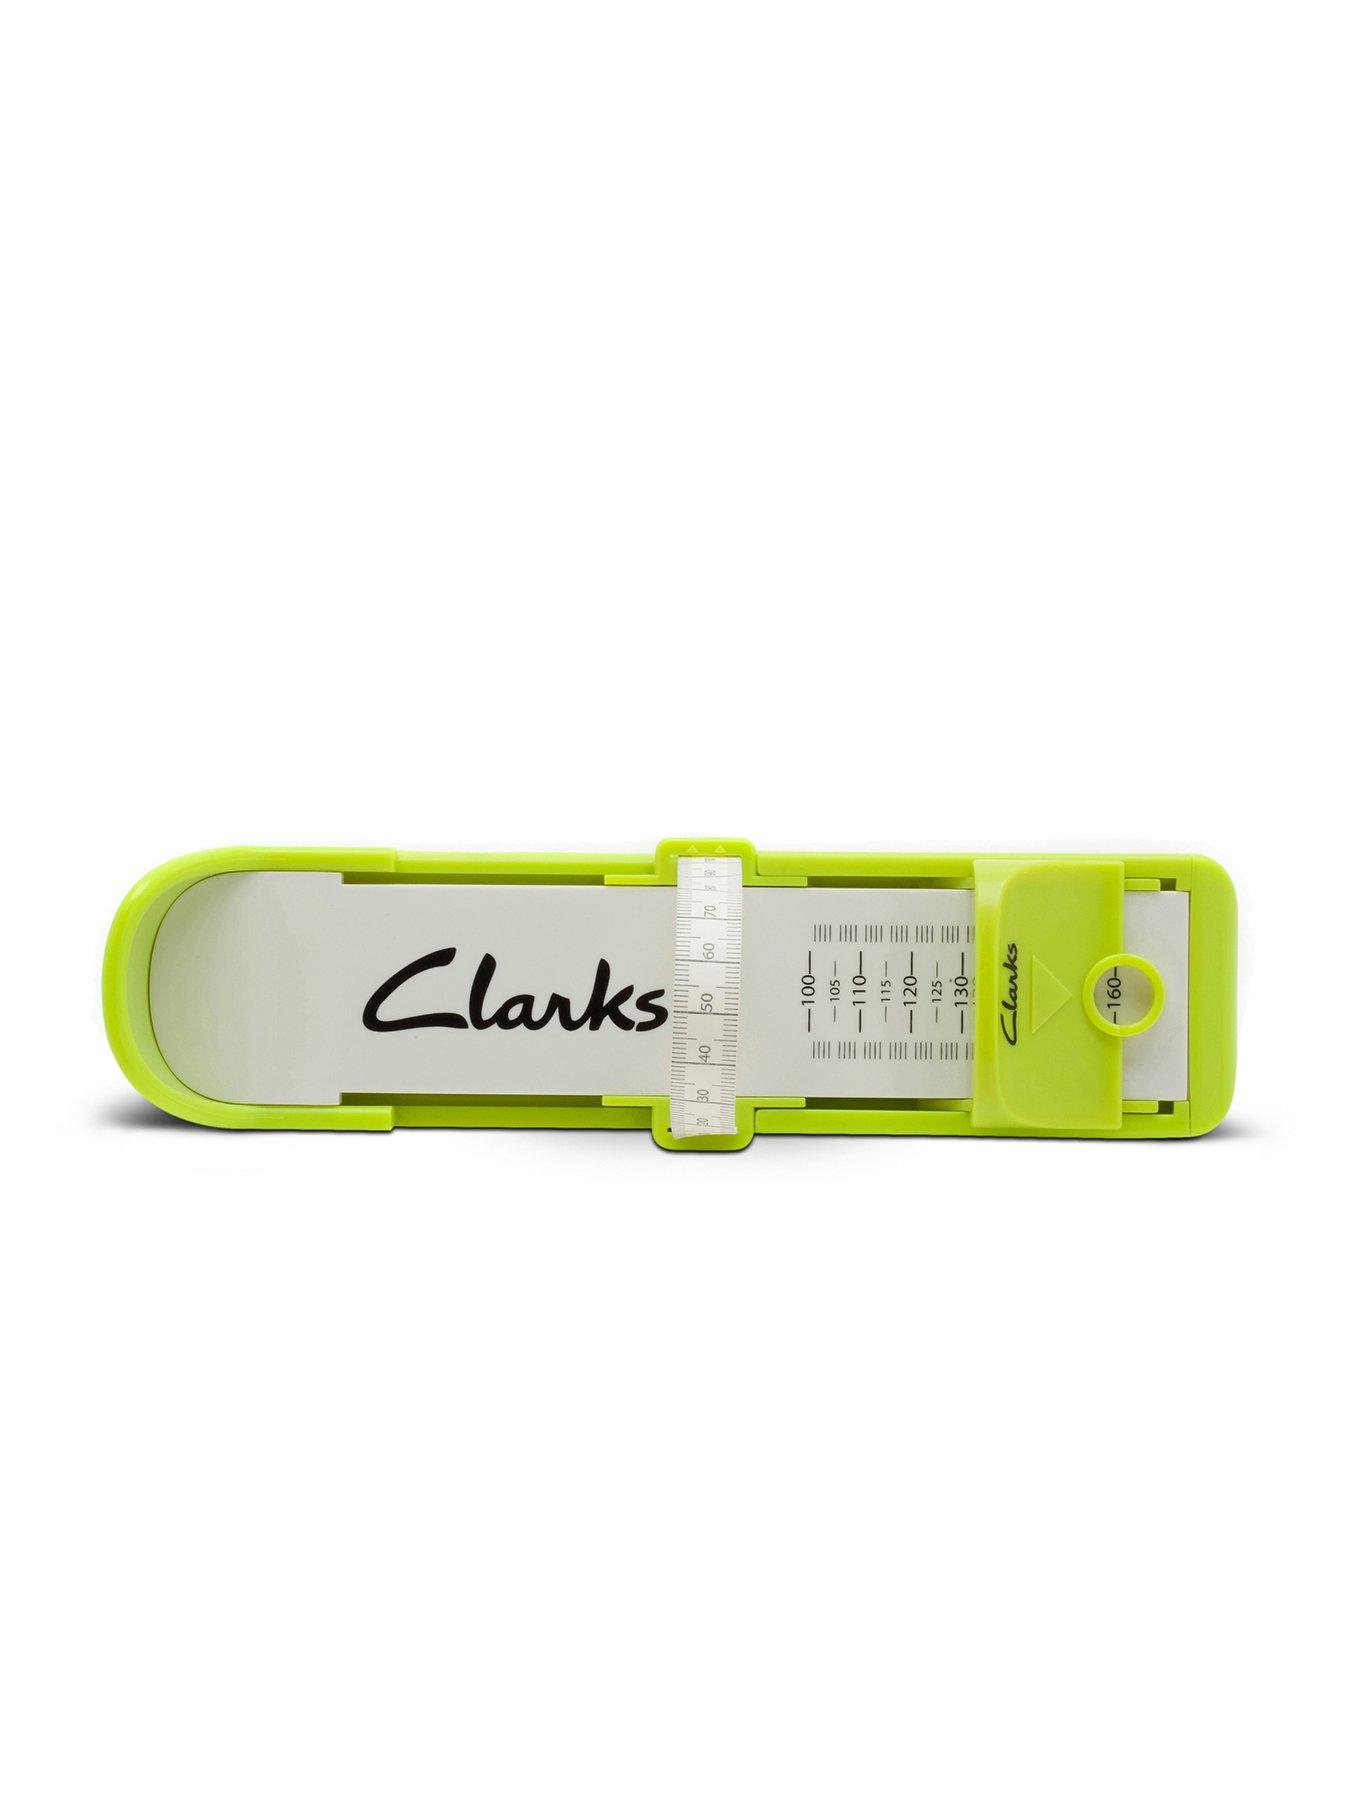 clarks measure at home